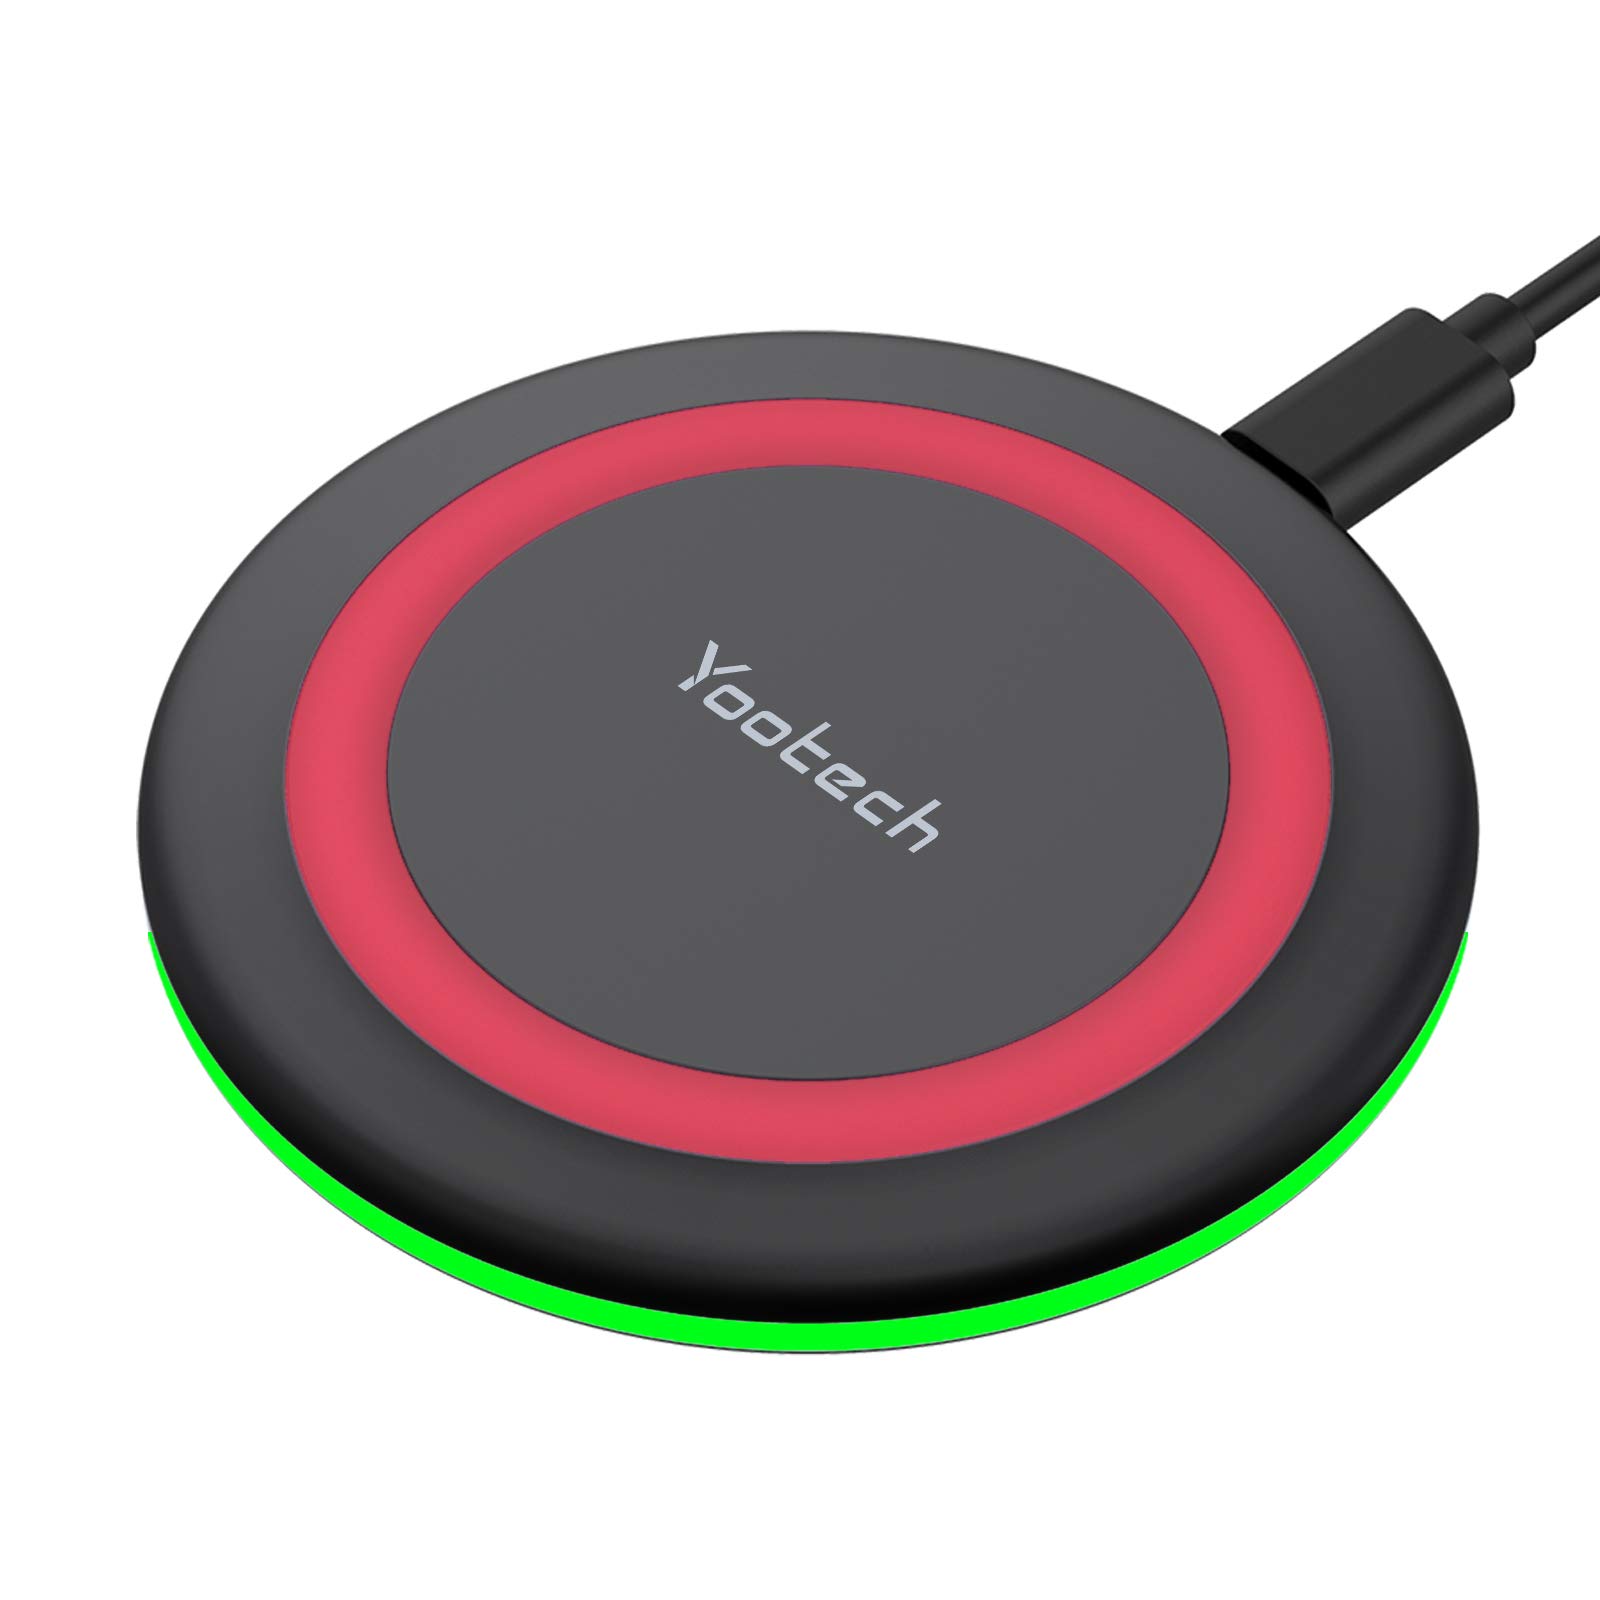 Book Cover Yootech Wireless Charger,10W Max Fast Wireless Charging Pad Compatible with iPhone 14/14 Plus/14 Pro/14 Pro Max/13/13 Mini/SE 2022/12/11/X/8,Samsung Galaxy S22/S21/S20,AirPods Pro 2(No AC Adapter) Black/Red